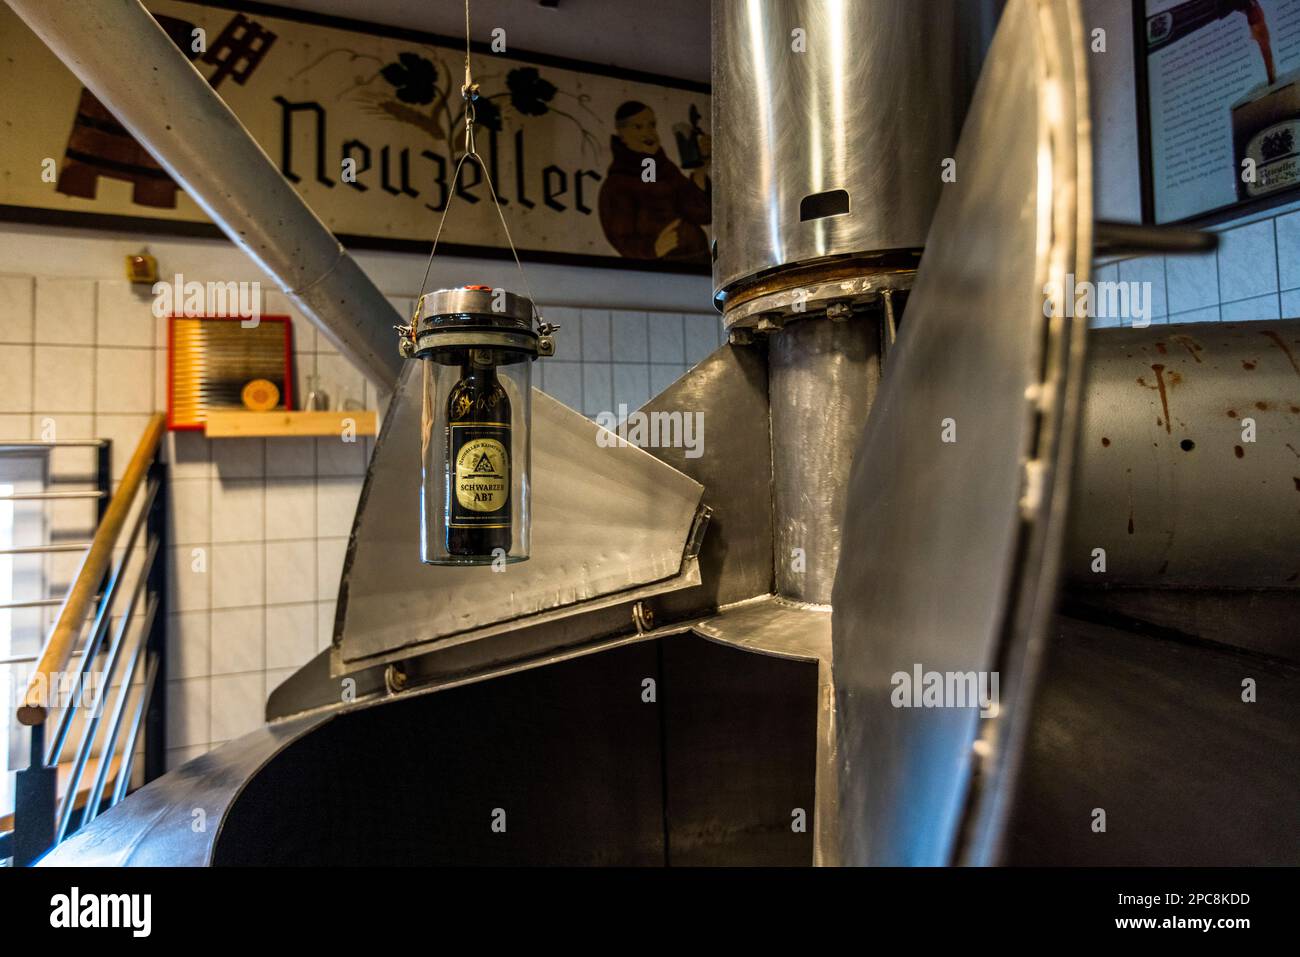 The bottle of Black Abbot blessed by Pope Francis is dipped into the brew kettle during each brewing process. Brewery Klosterbrauerei Neuzelle, Germany Stock Photo